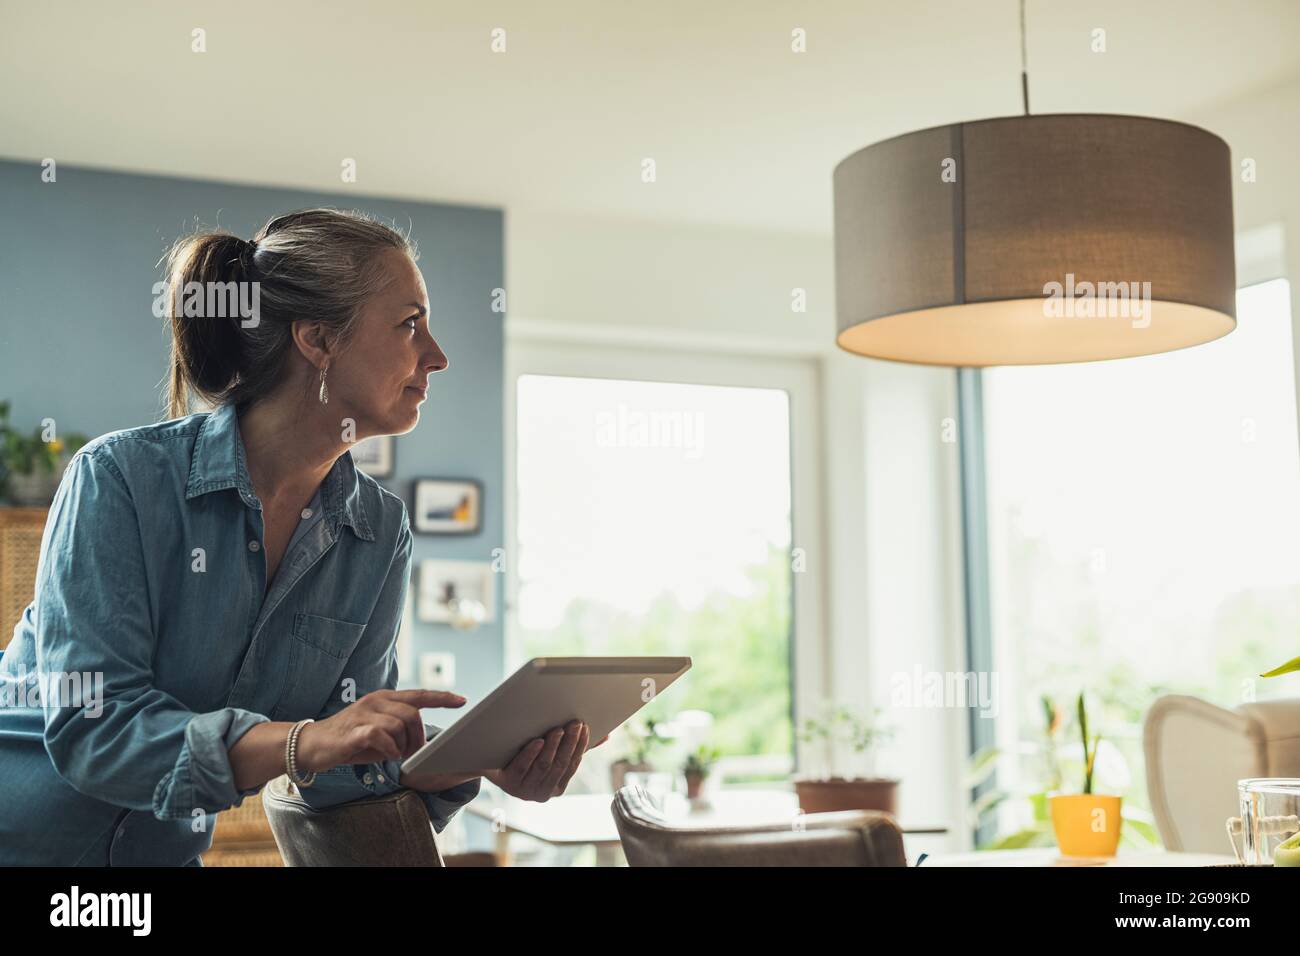 Mature woman turning on lighting equipment with digital tablet at home Stock Photo